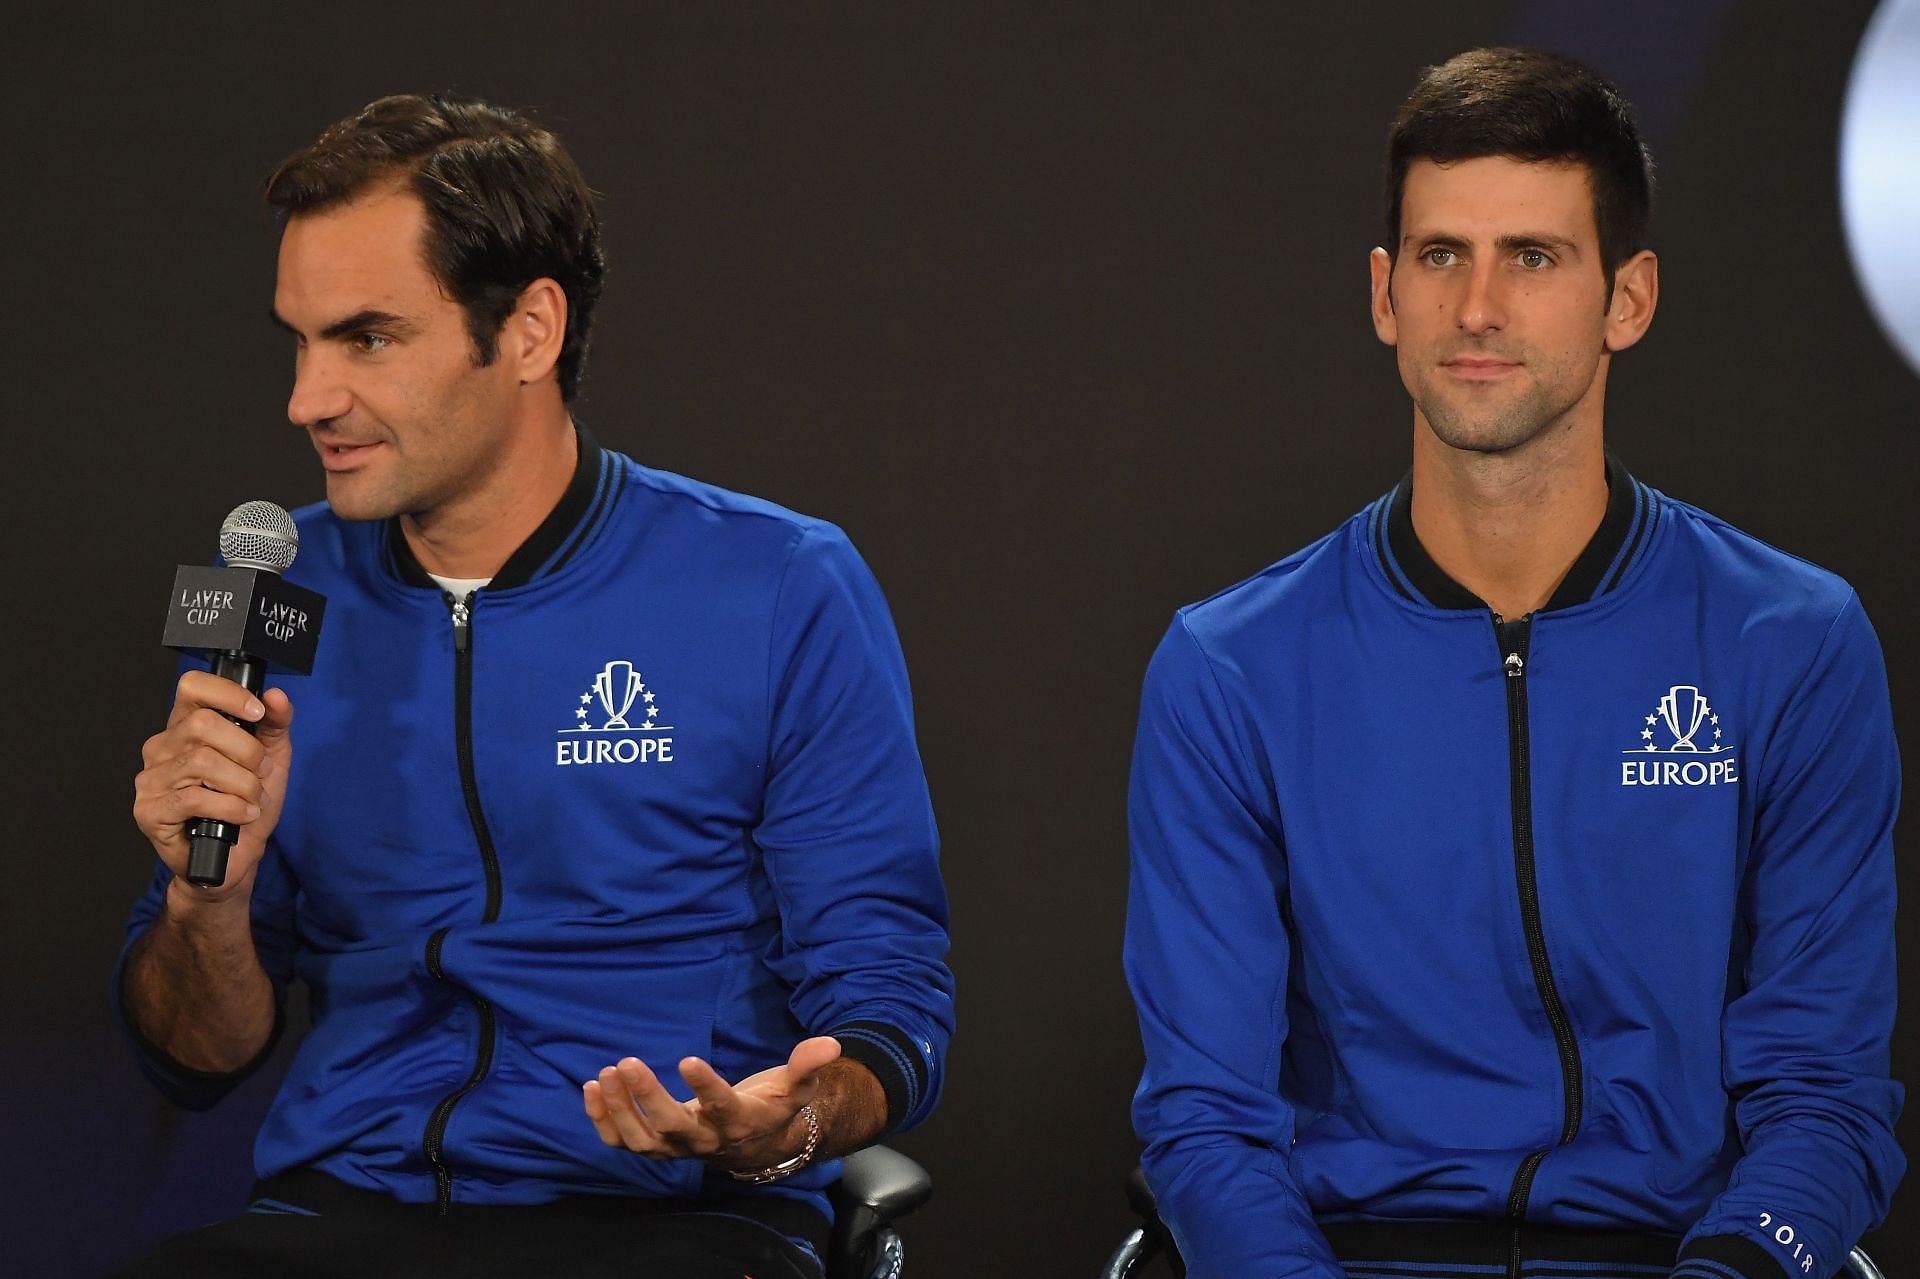 Roger Federer and Novak Djokovic at the 2018 Laver Cup